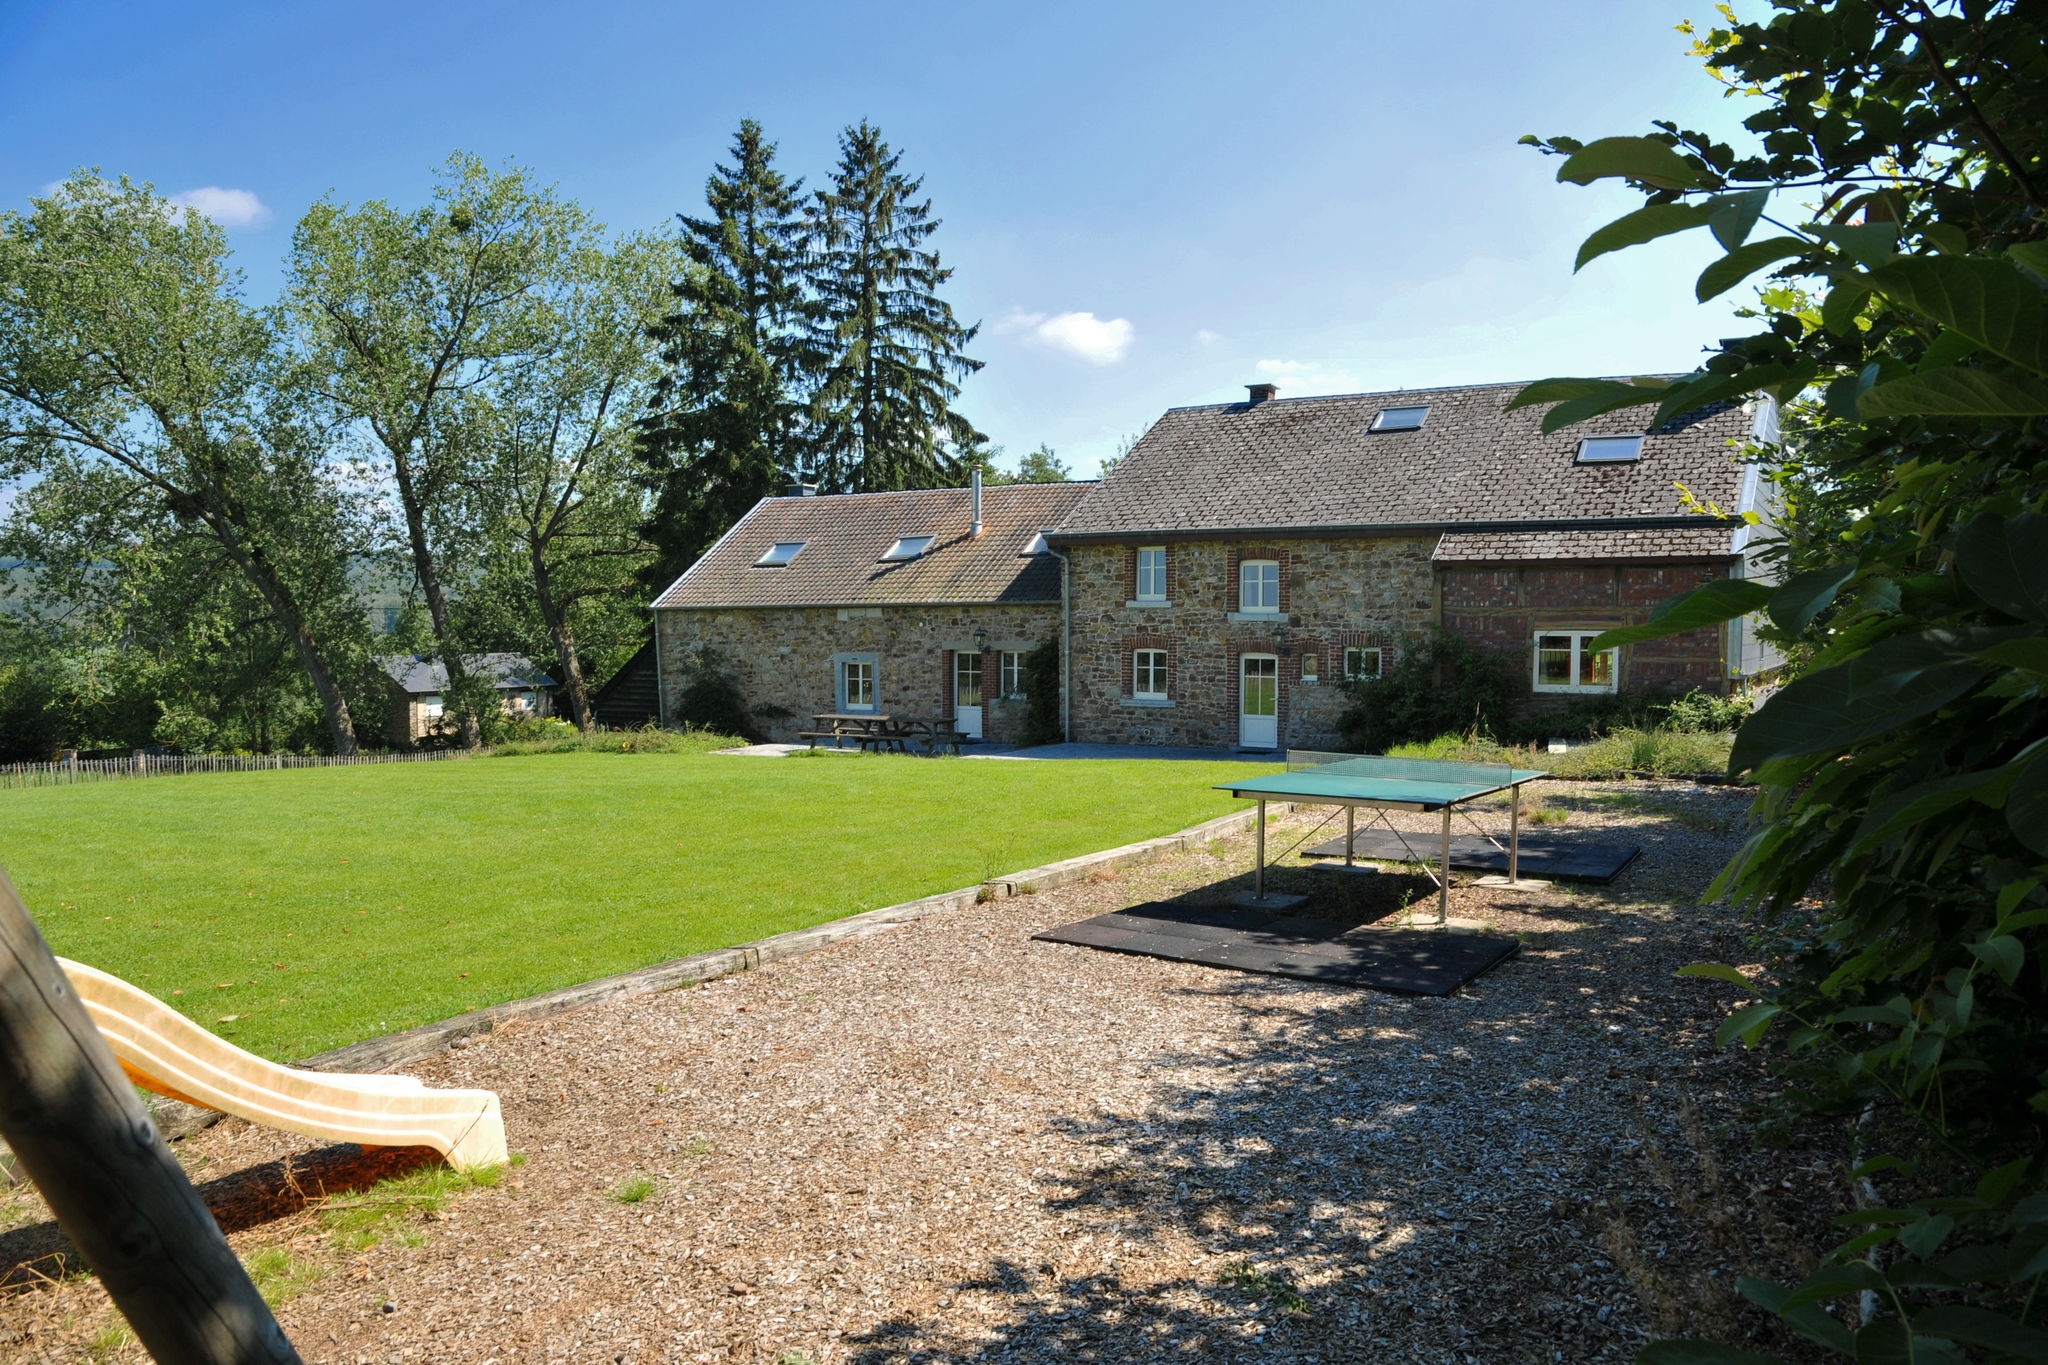 Renovated farmhouse, completely furnished for groups of up to 32 people